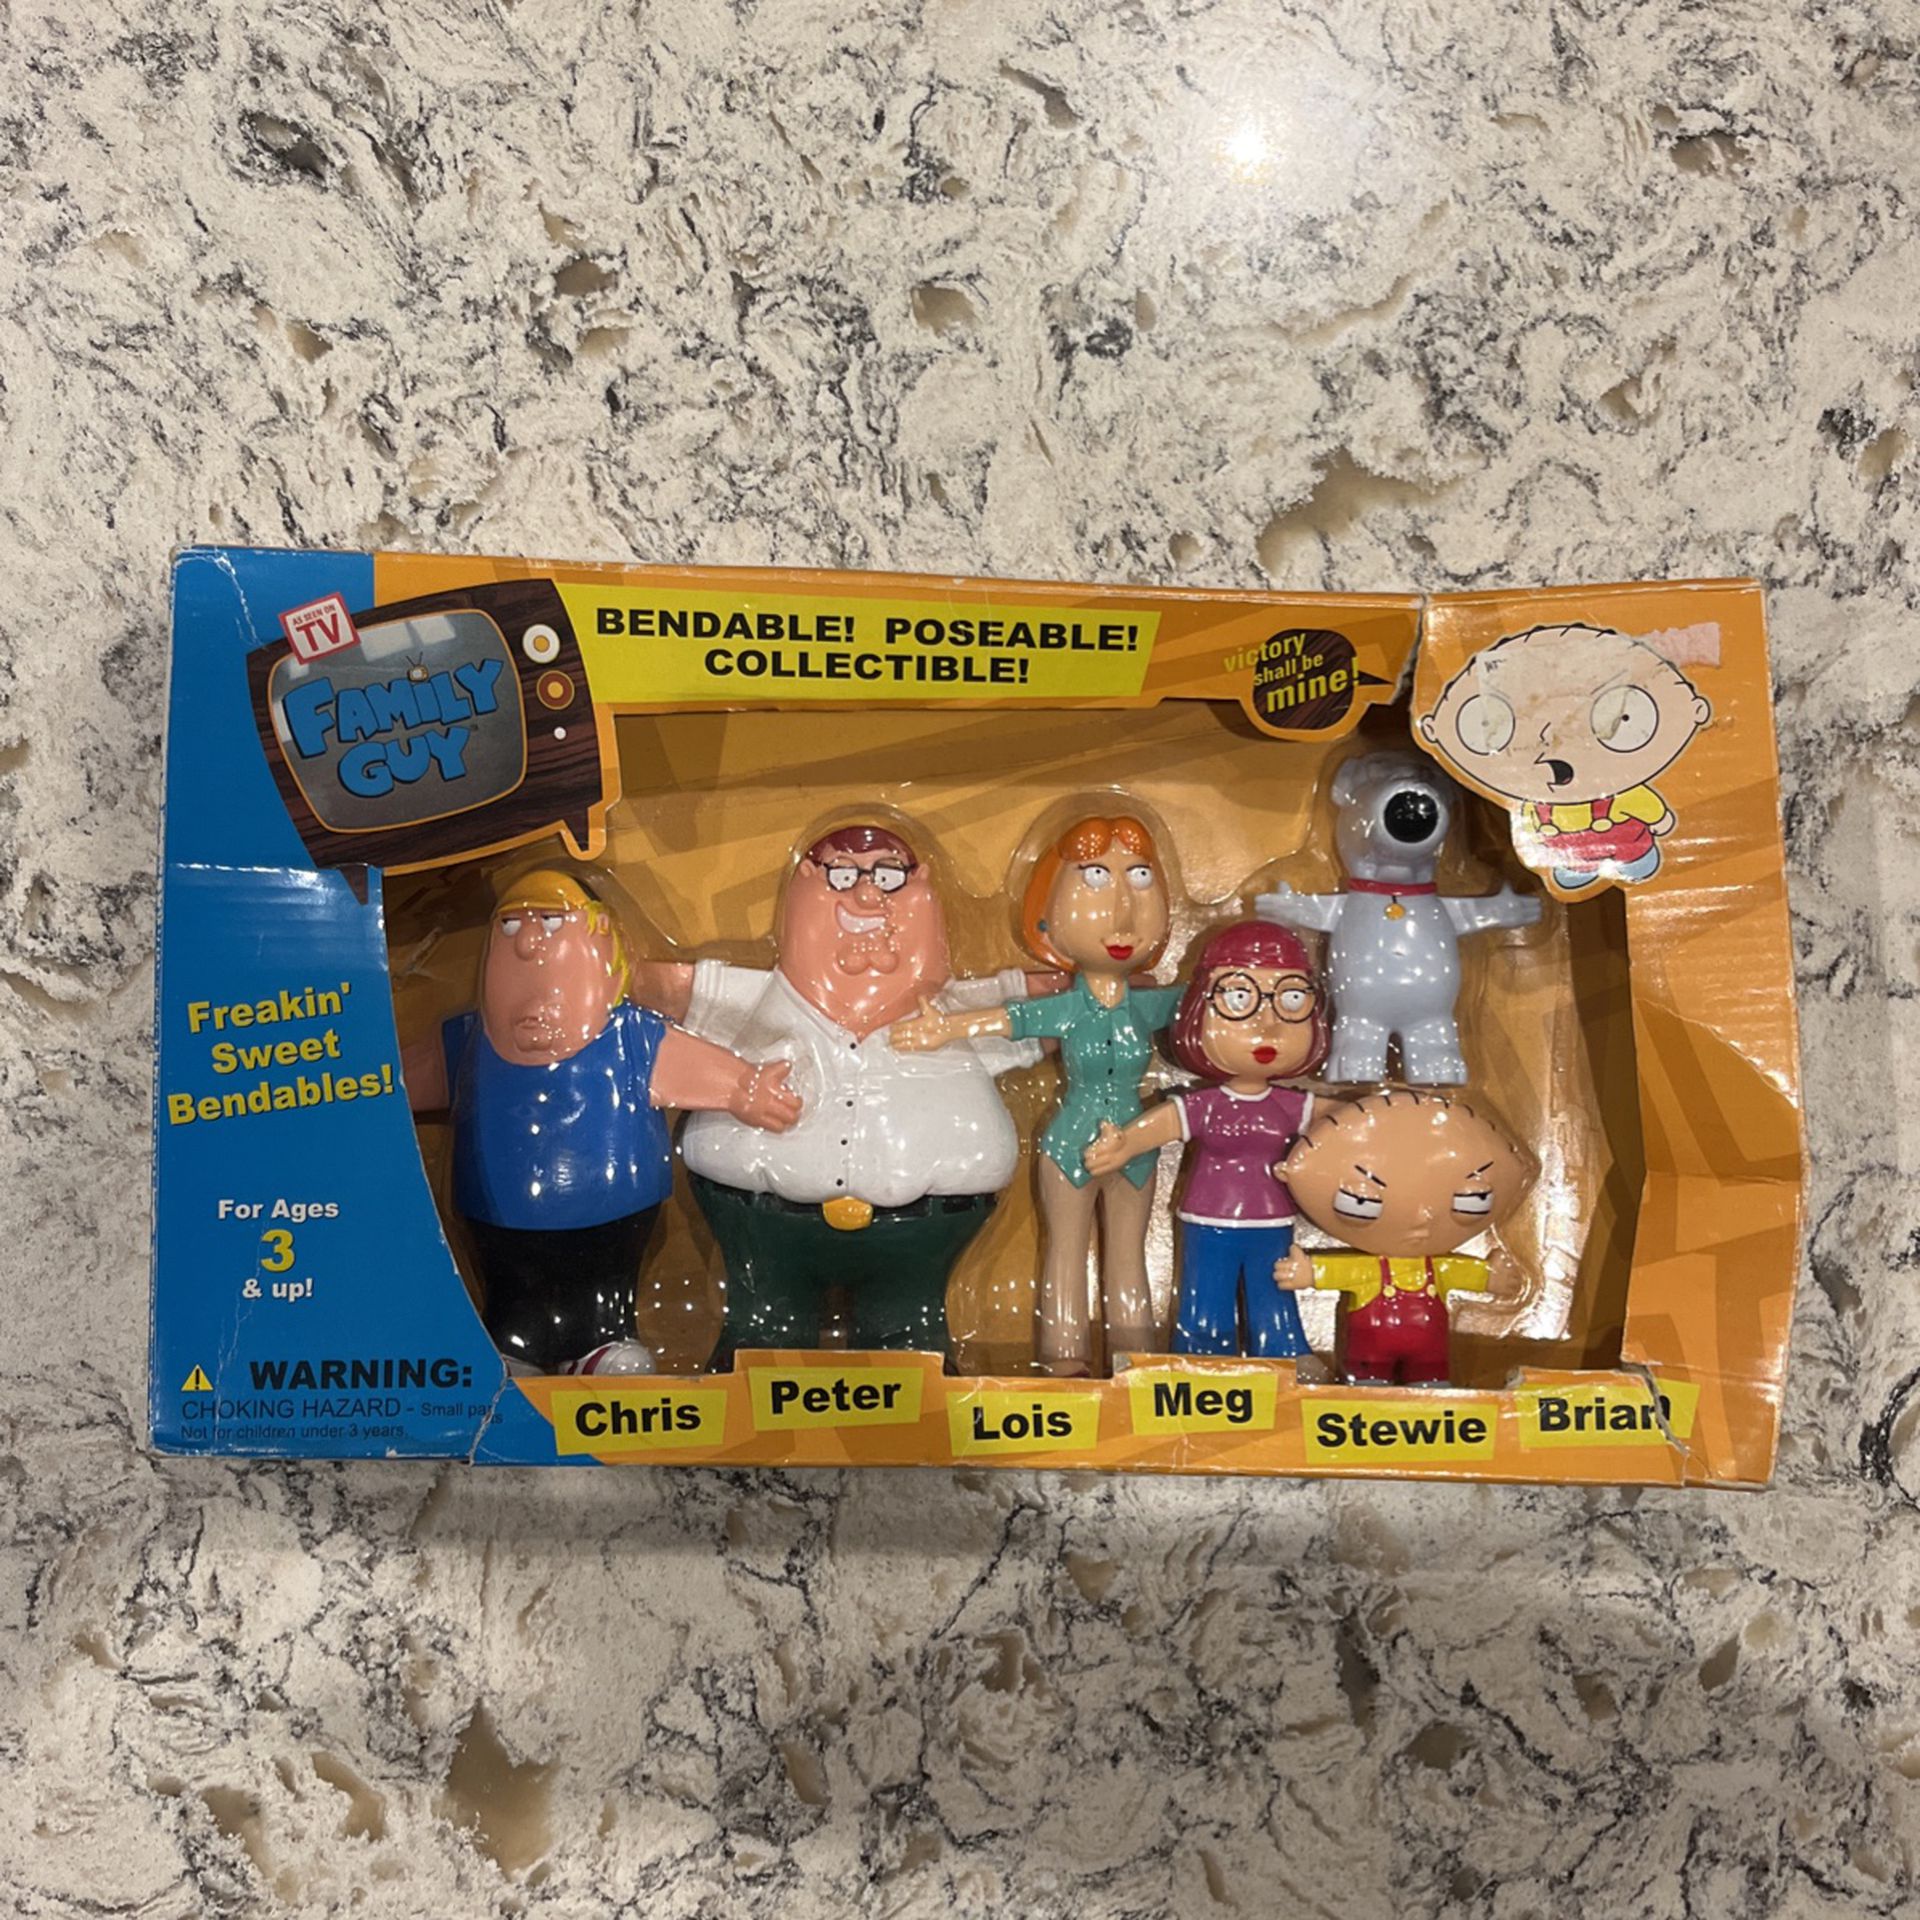 Limited Edition Family Guy Freakin’ Sweet Bendable Figurines 2004